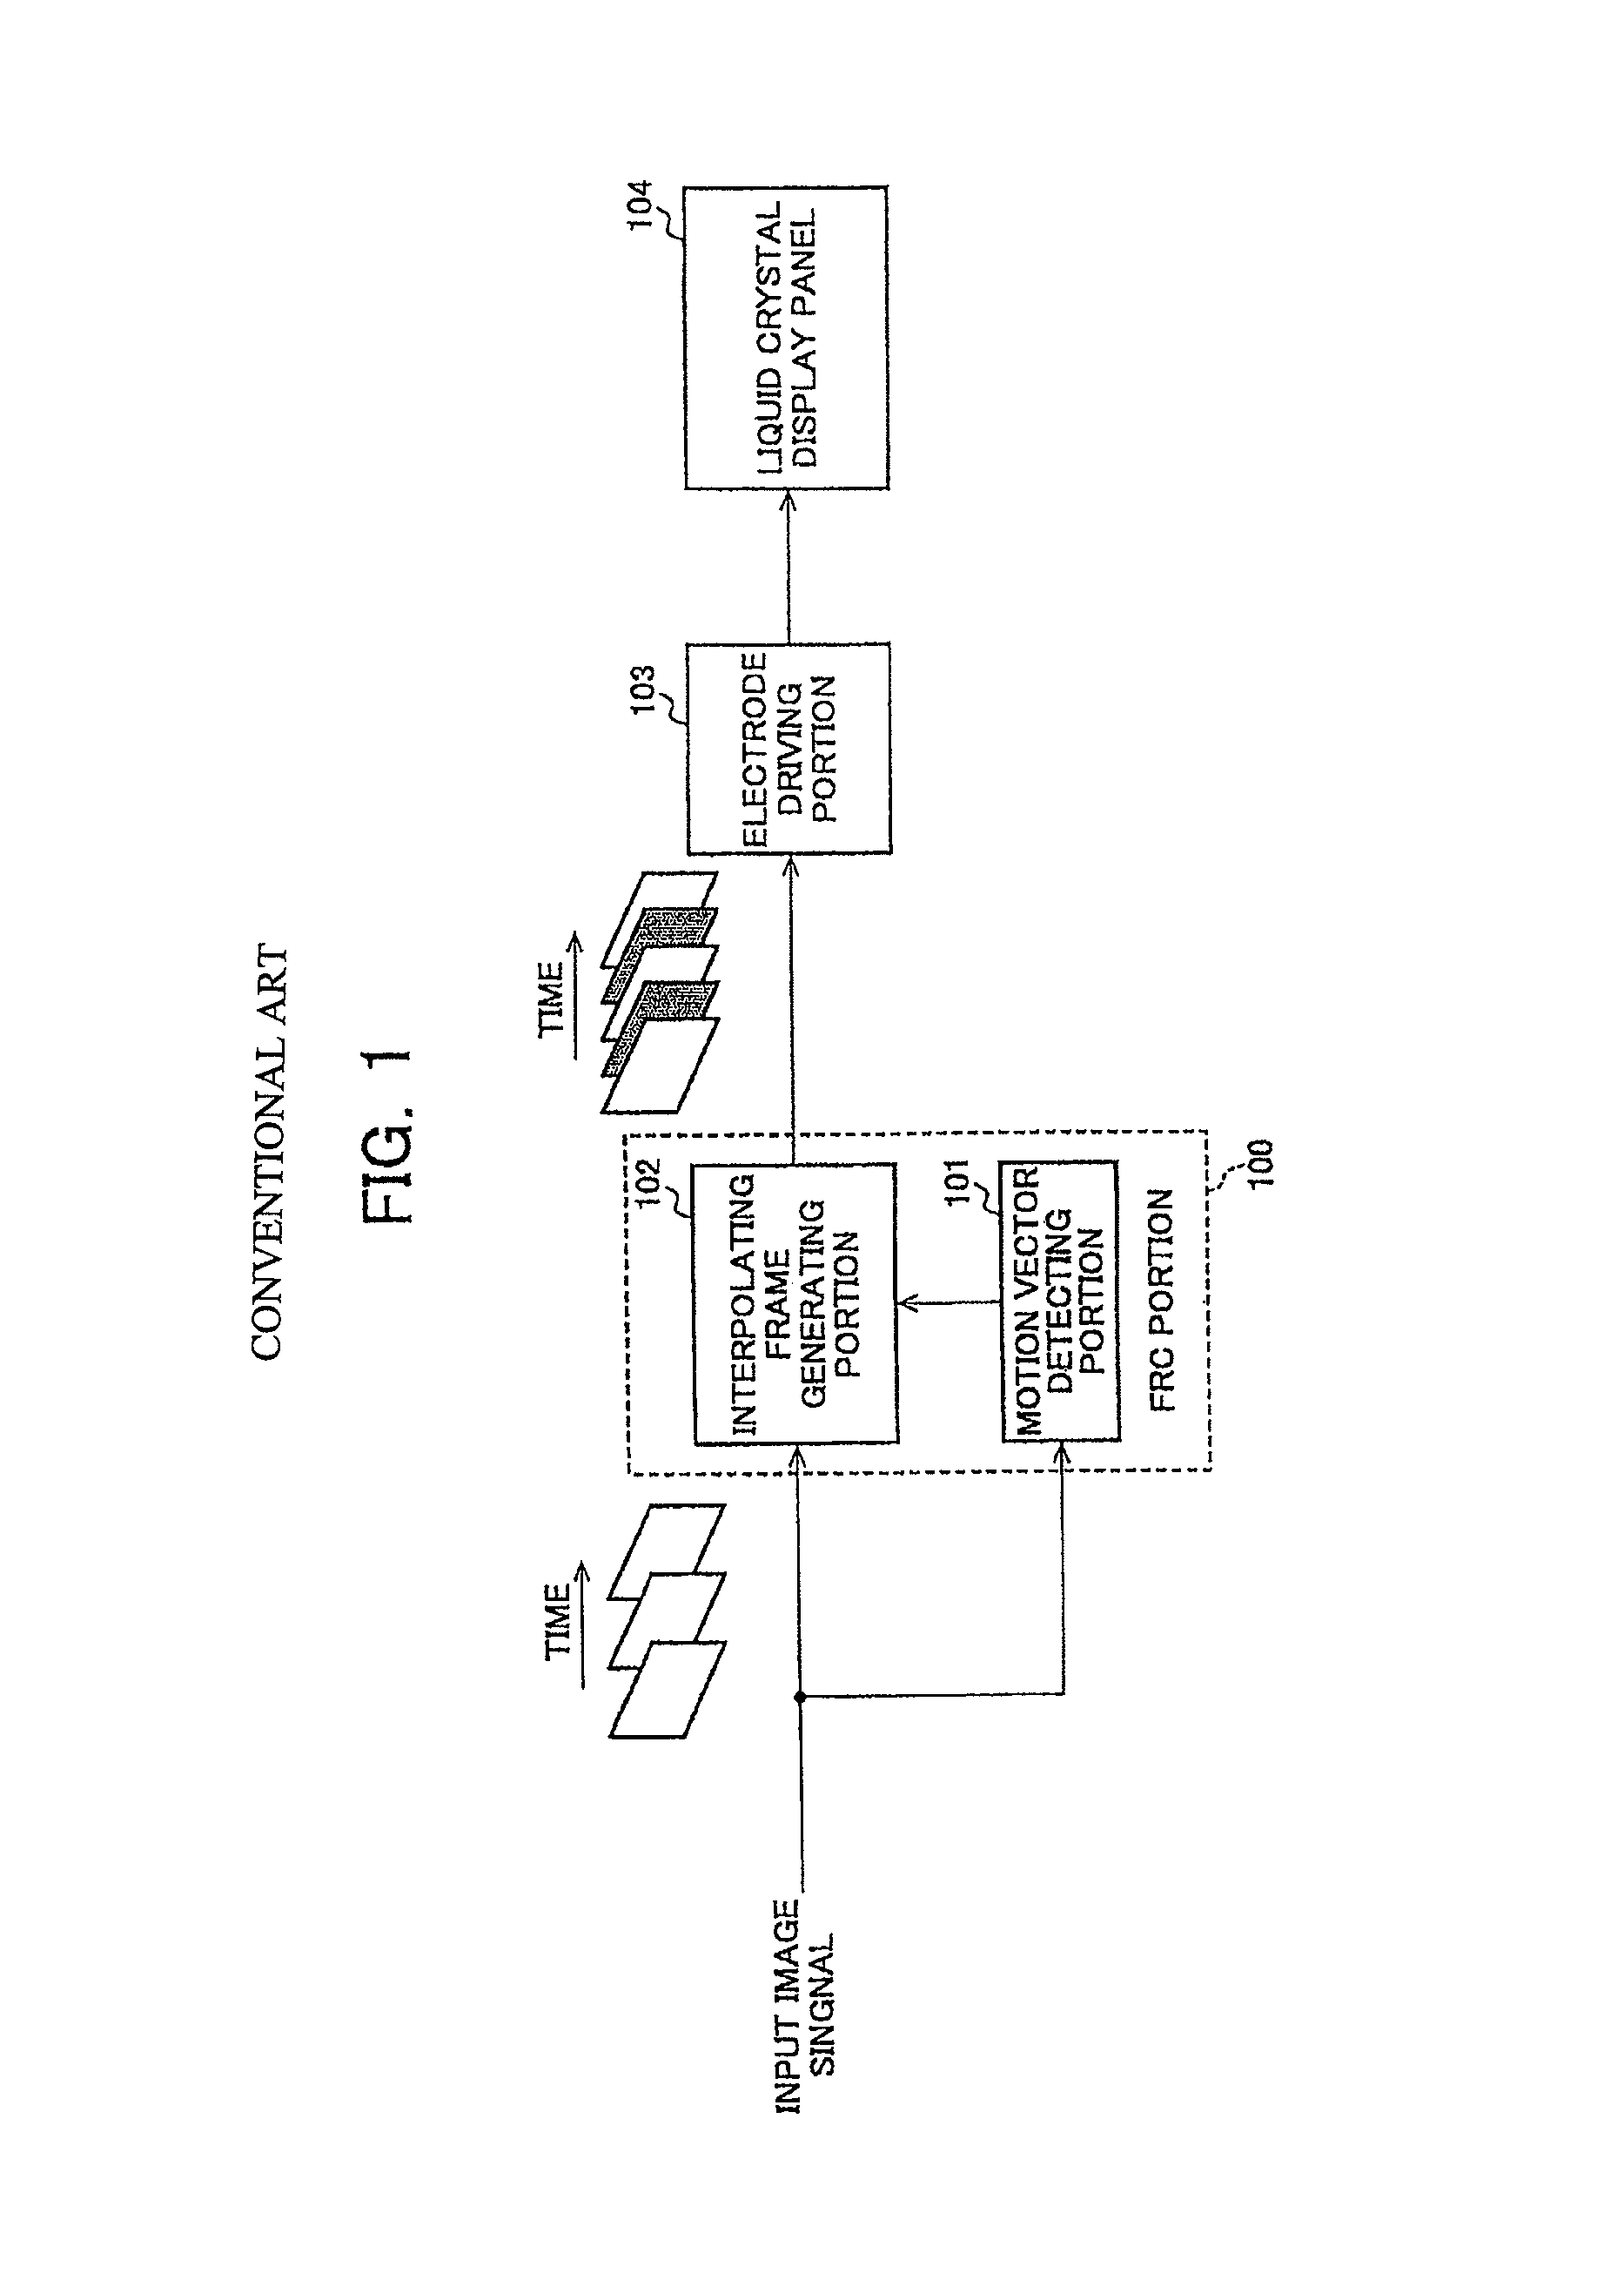 Image displaying device and method for preventing image quality deterioration